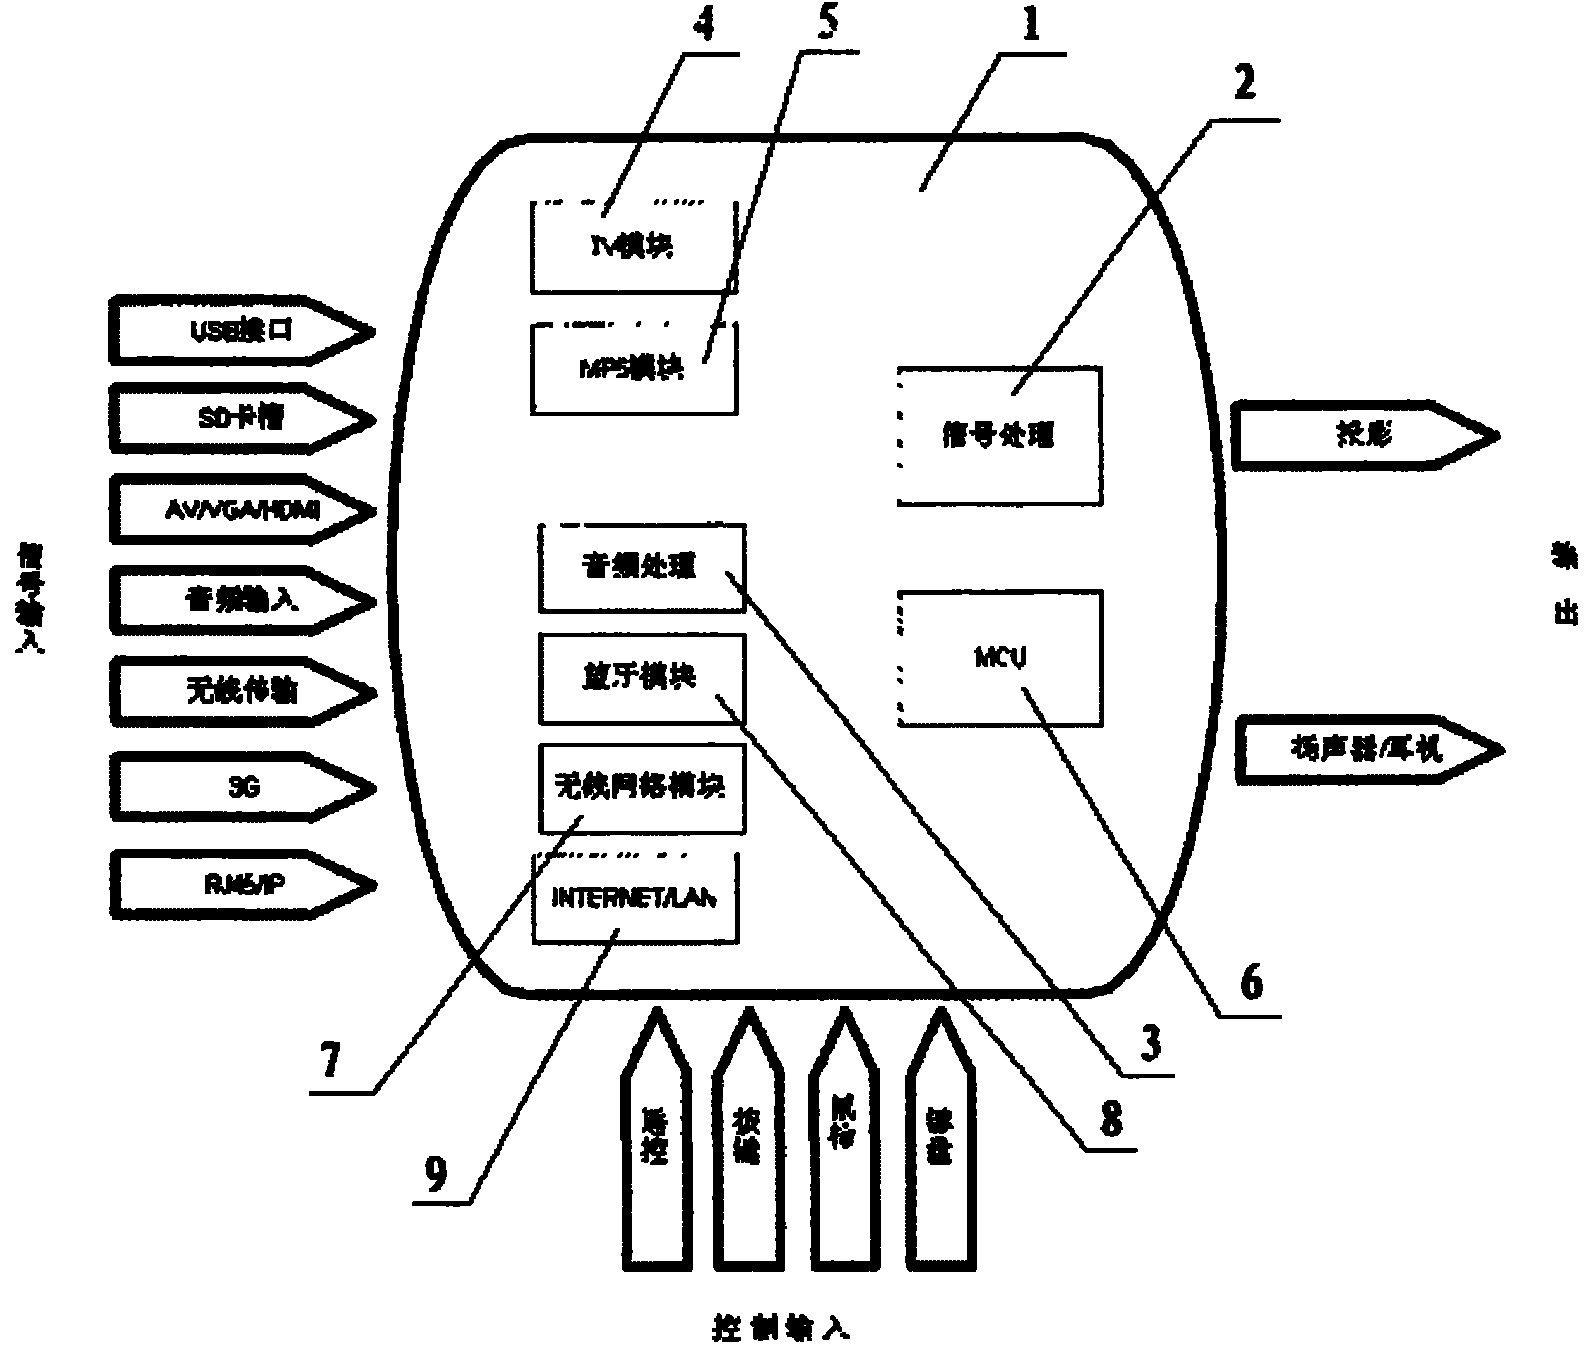 Multimedia projector with embedded operation system